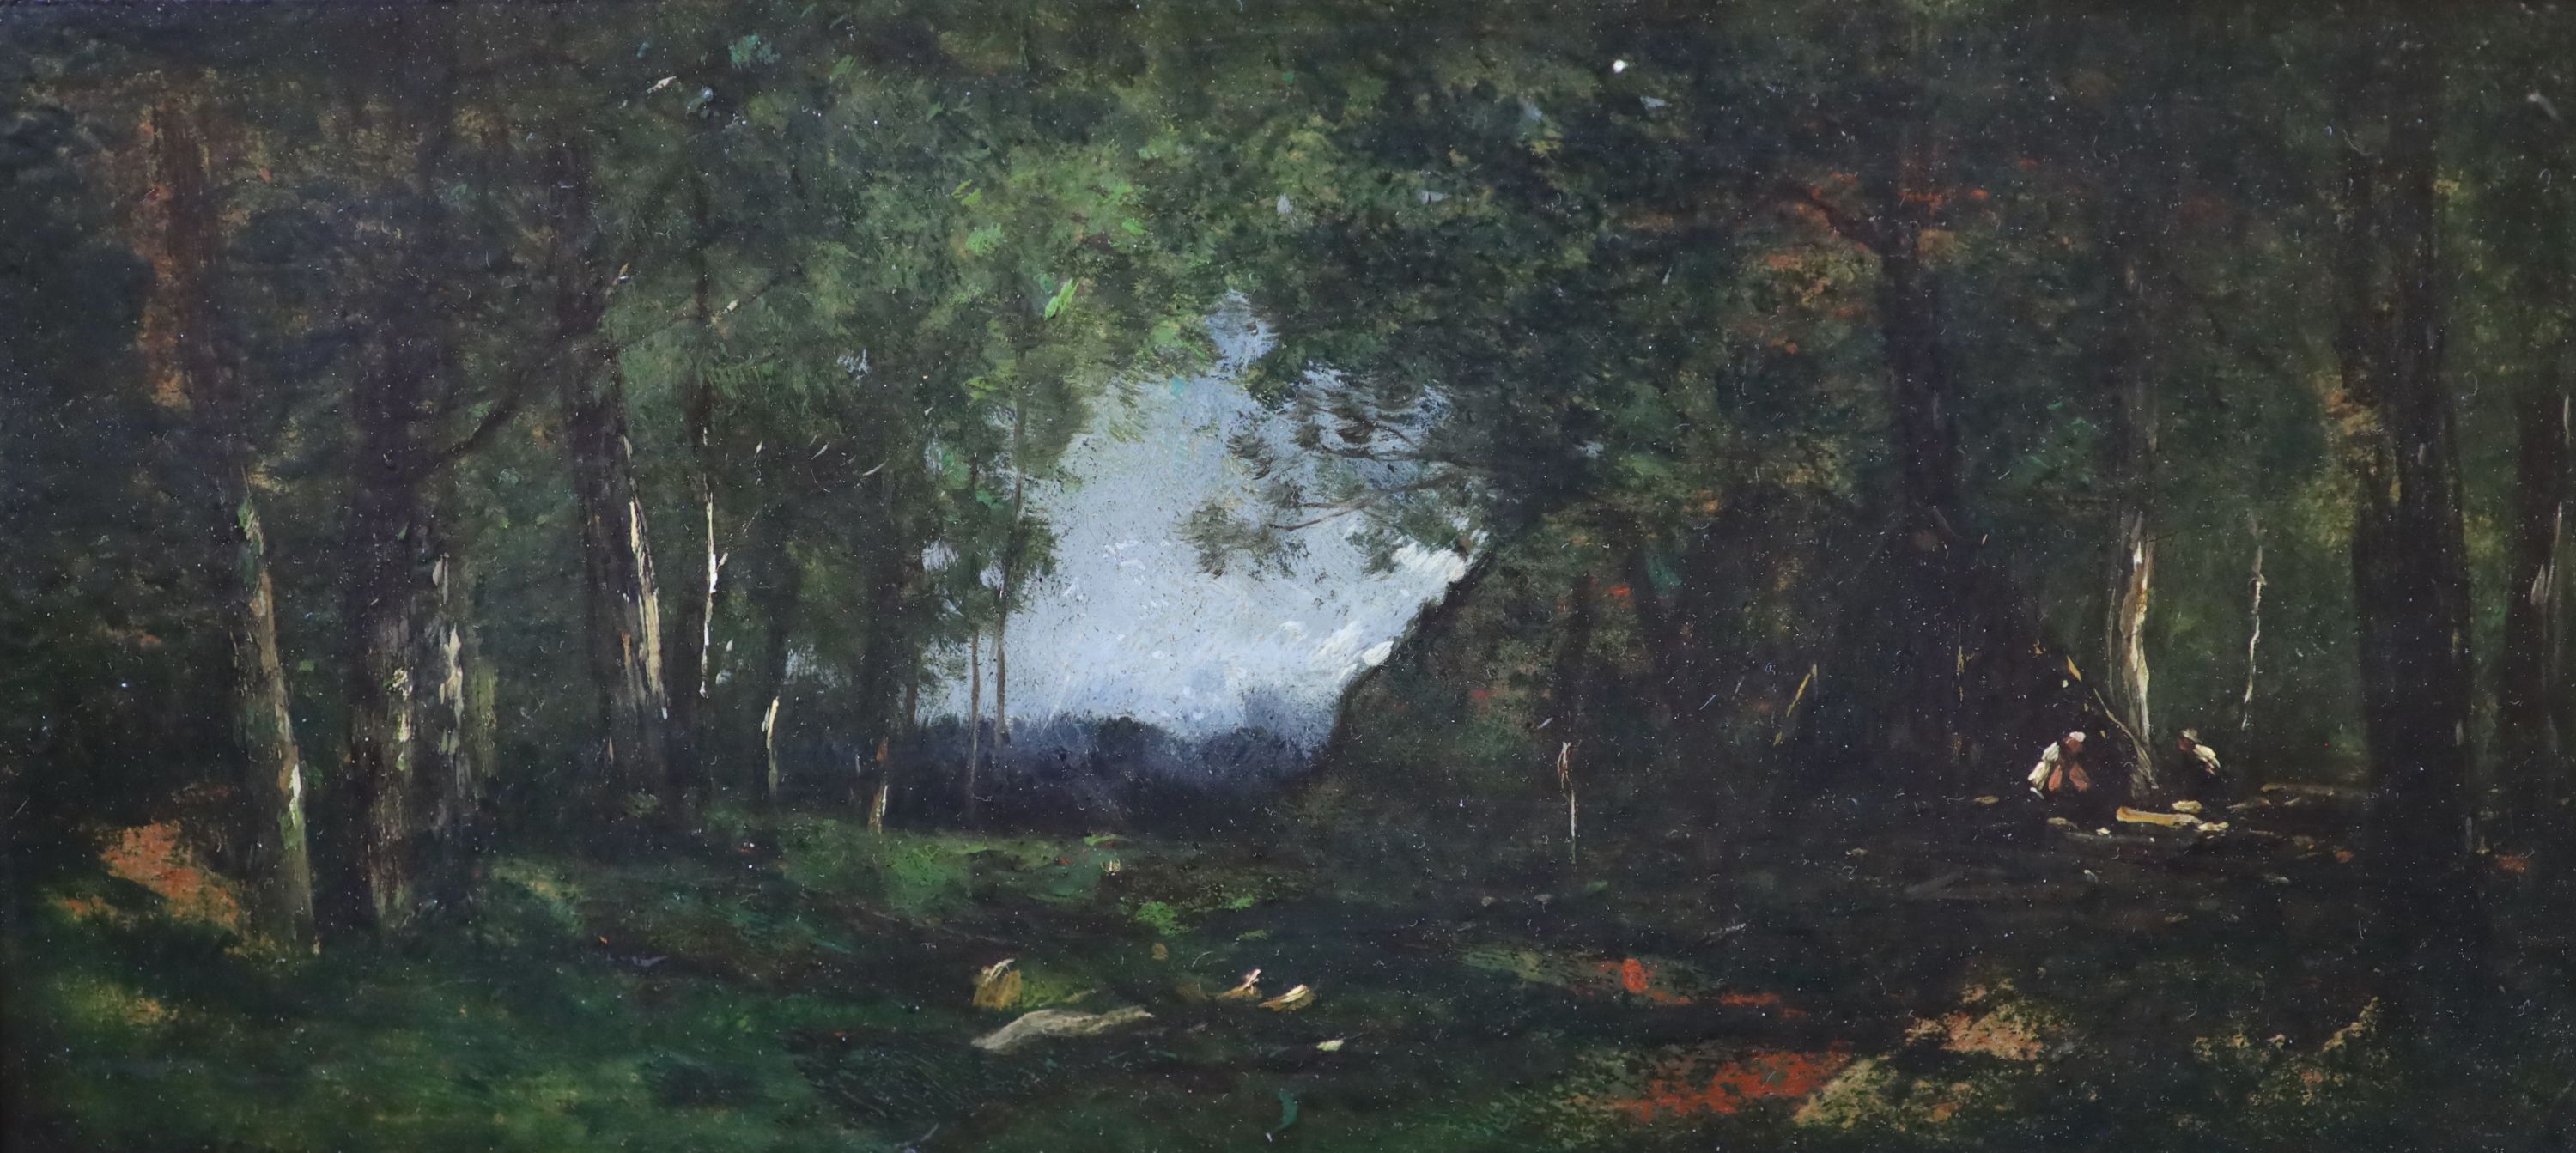 Charles Francois Daubigny (French, 1817-1878), Figures in woodland, Oil on wooden panel, 11 x 24cm.